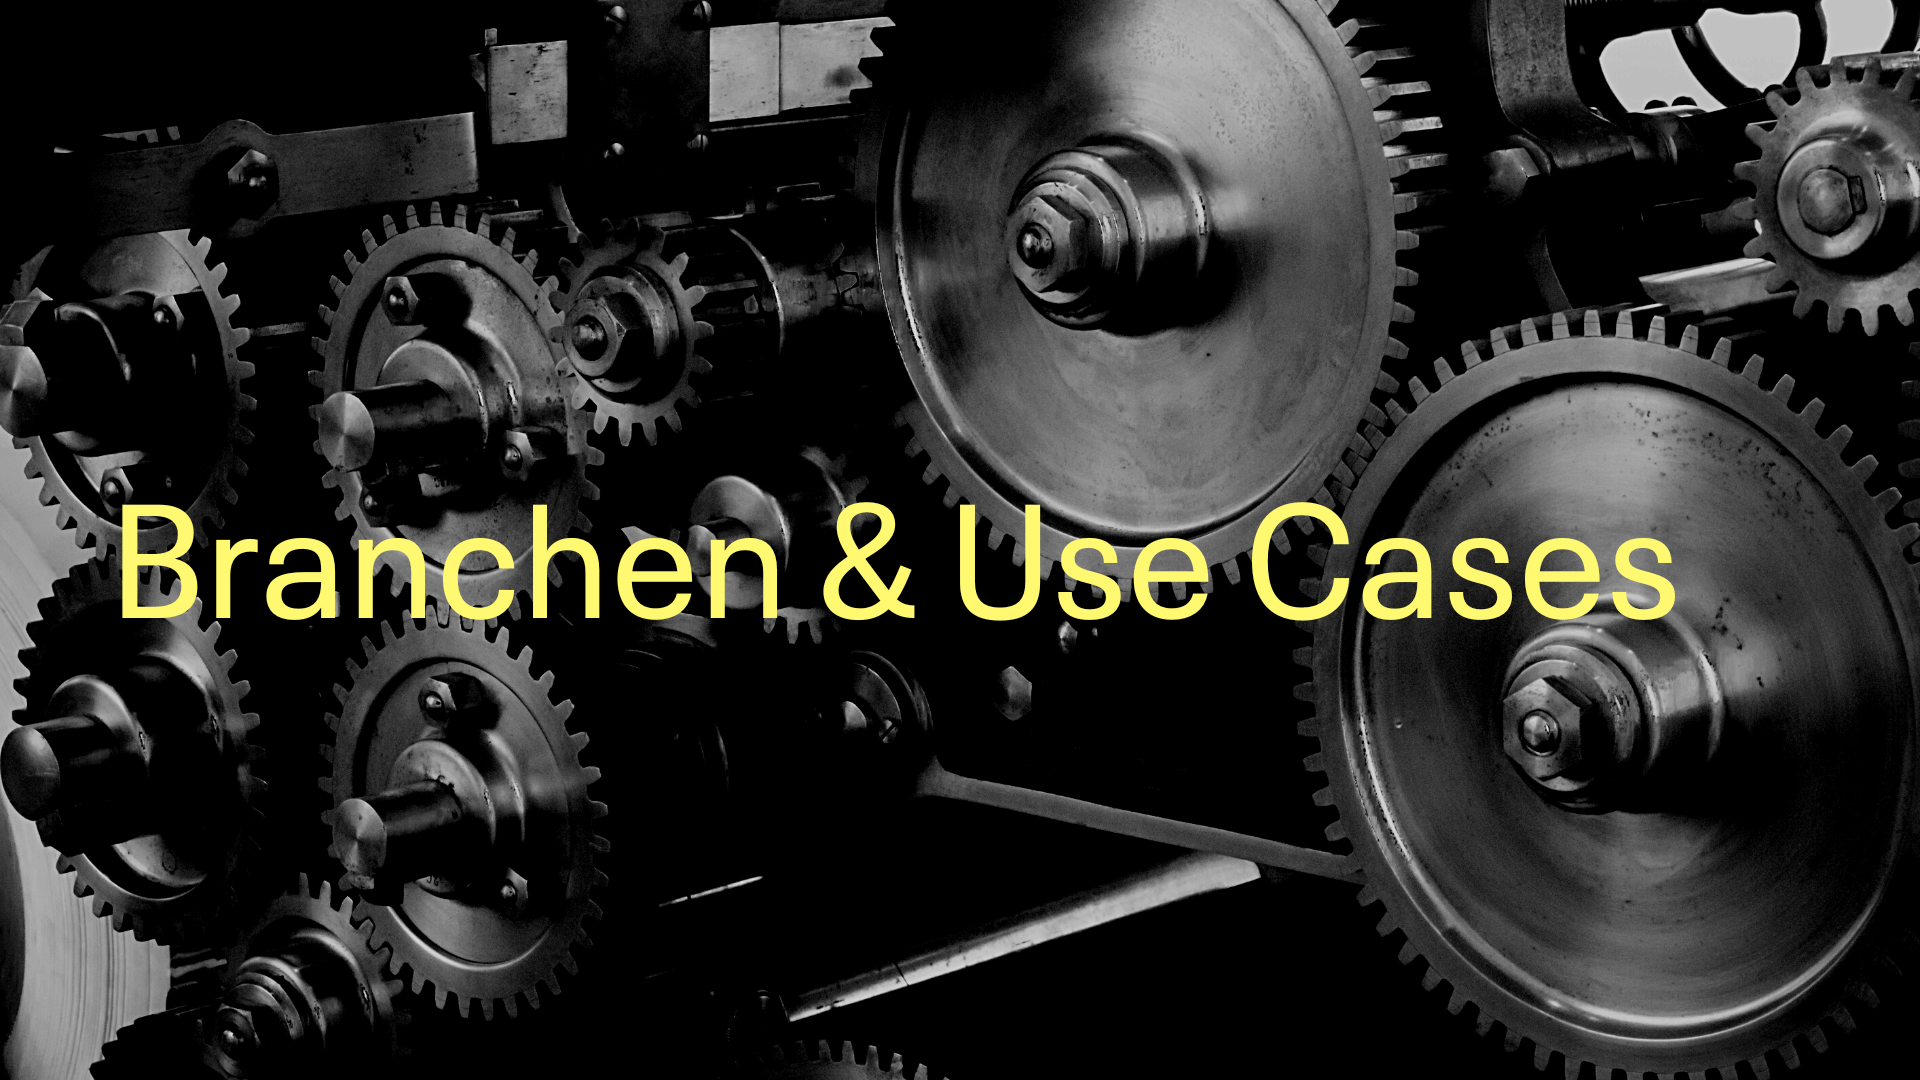 Branchen & use cases